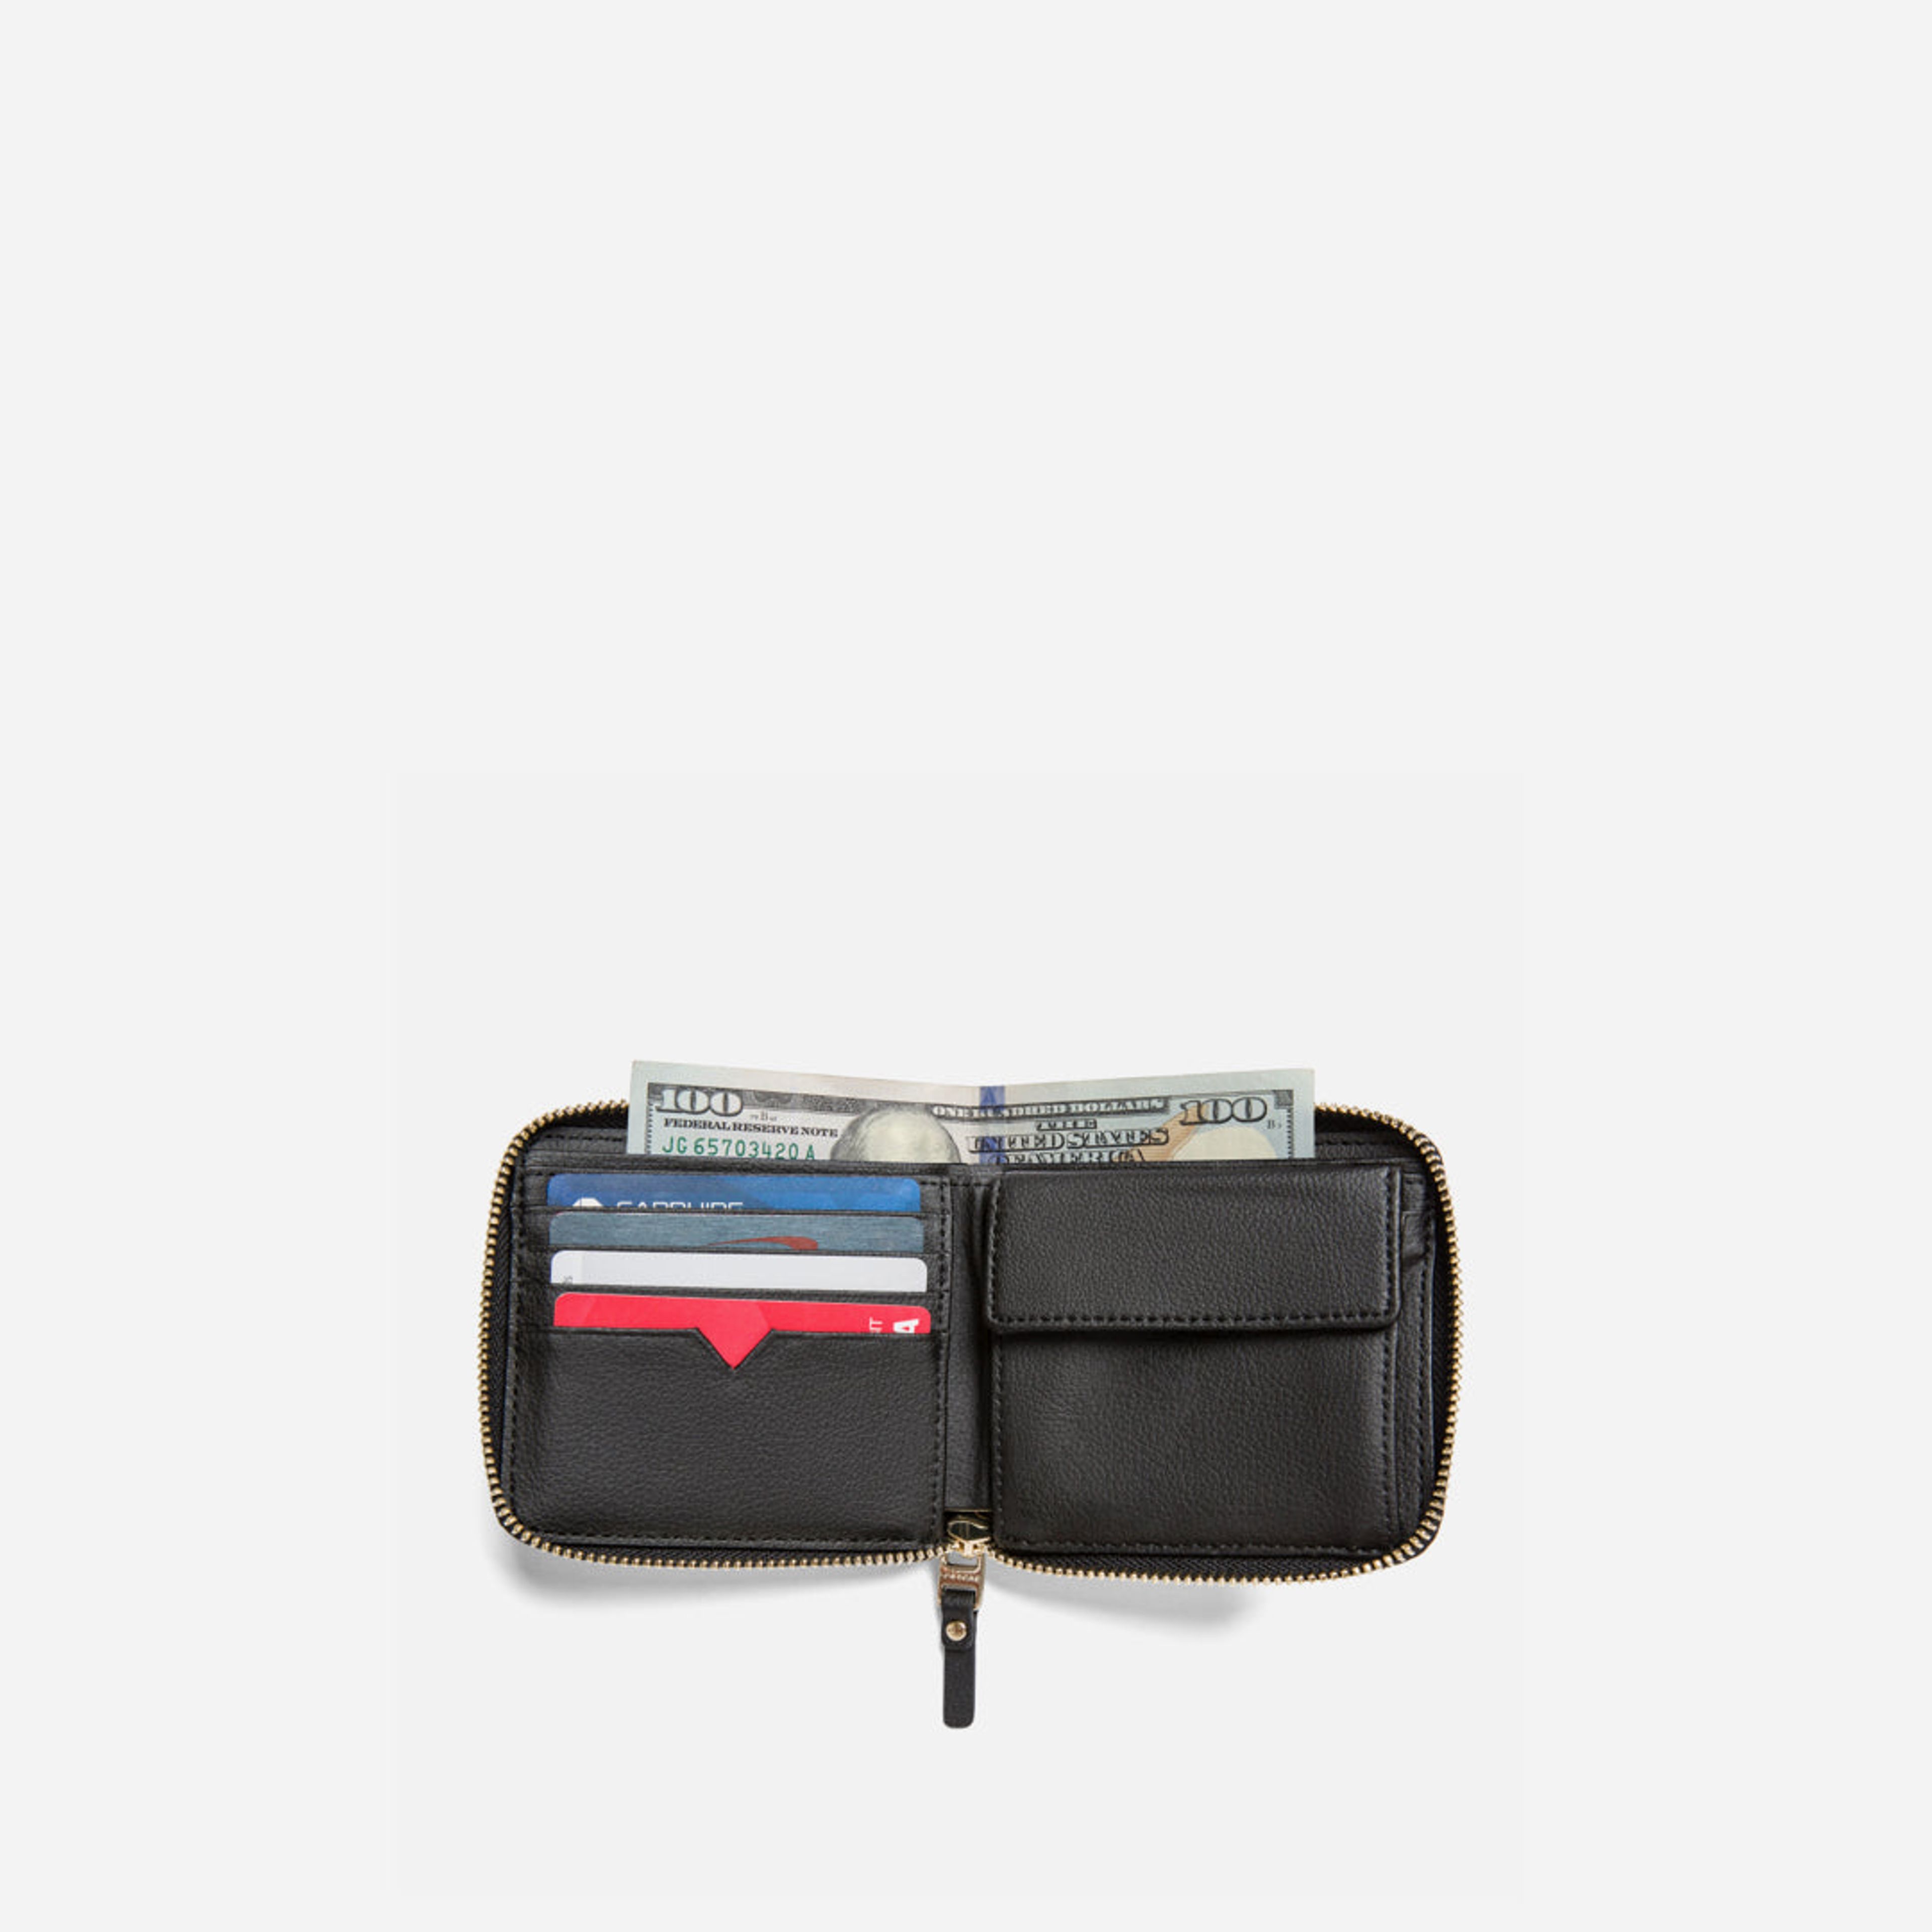 Mallorca Small Wallet - Cactus Leather - Black / Gold / Camel